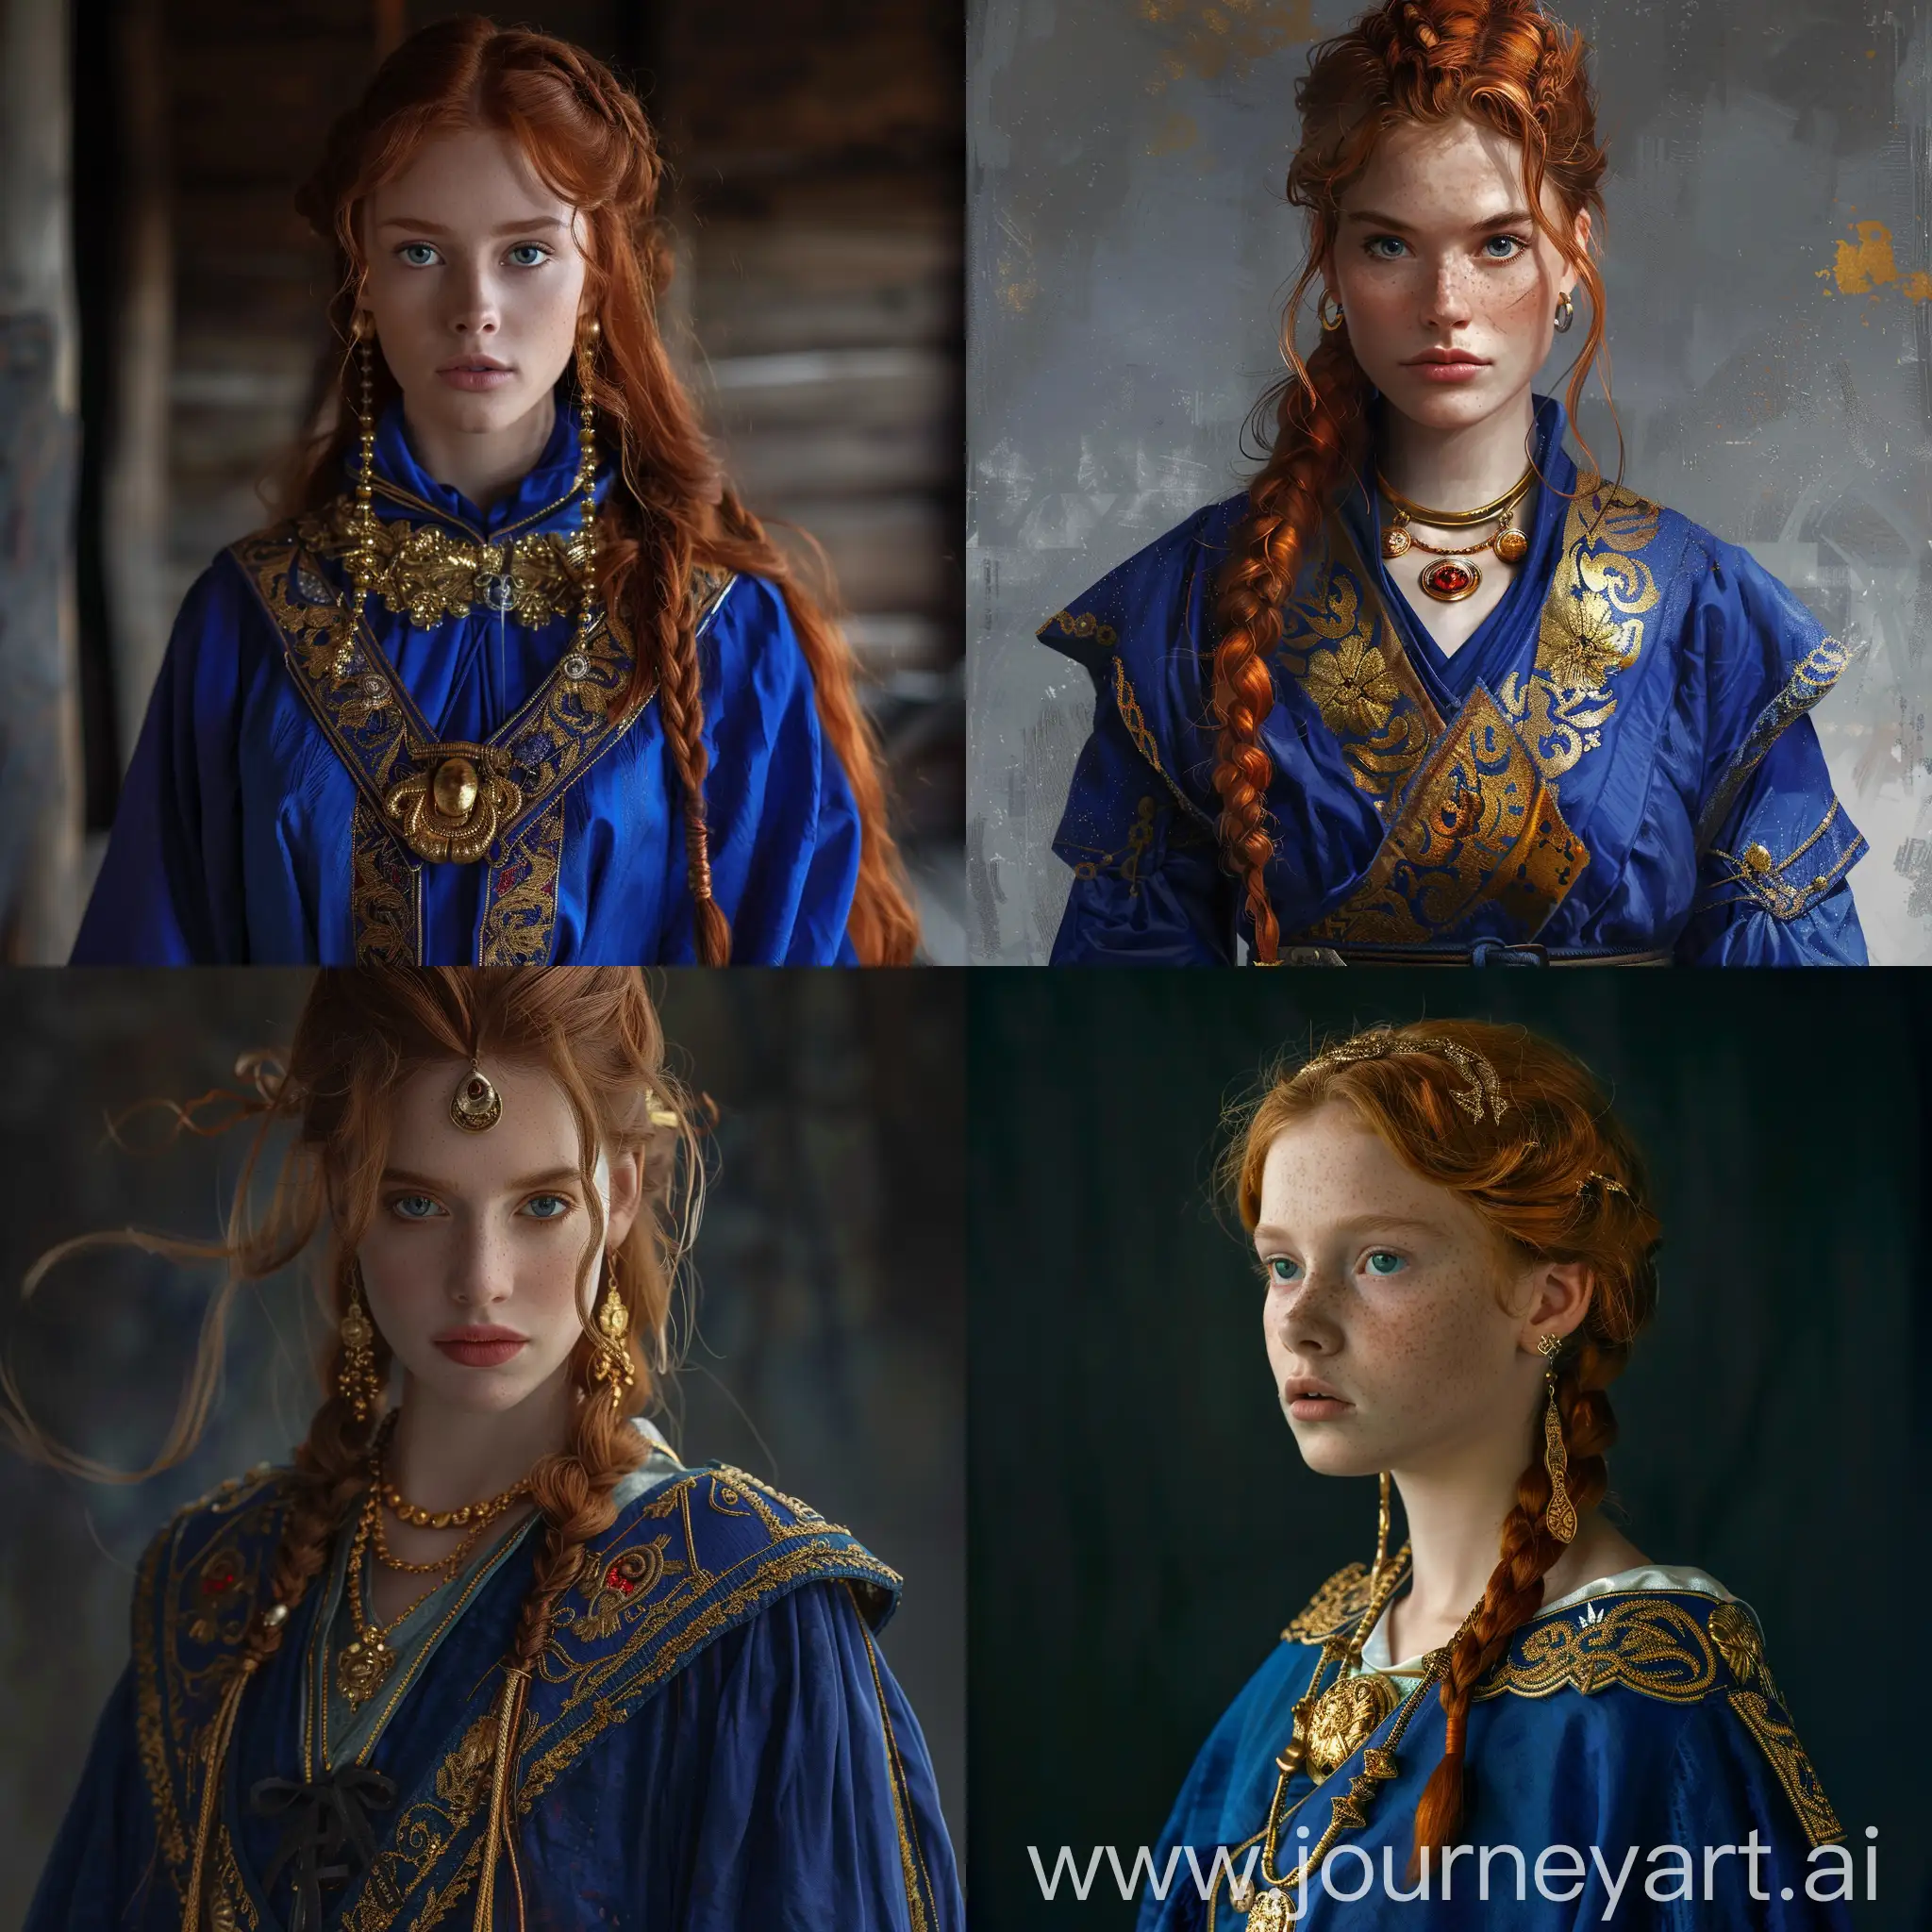 Noblewoman-in-Blue-Robes-with-Gold-Ornaments-Portrait